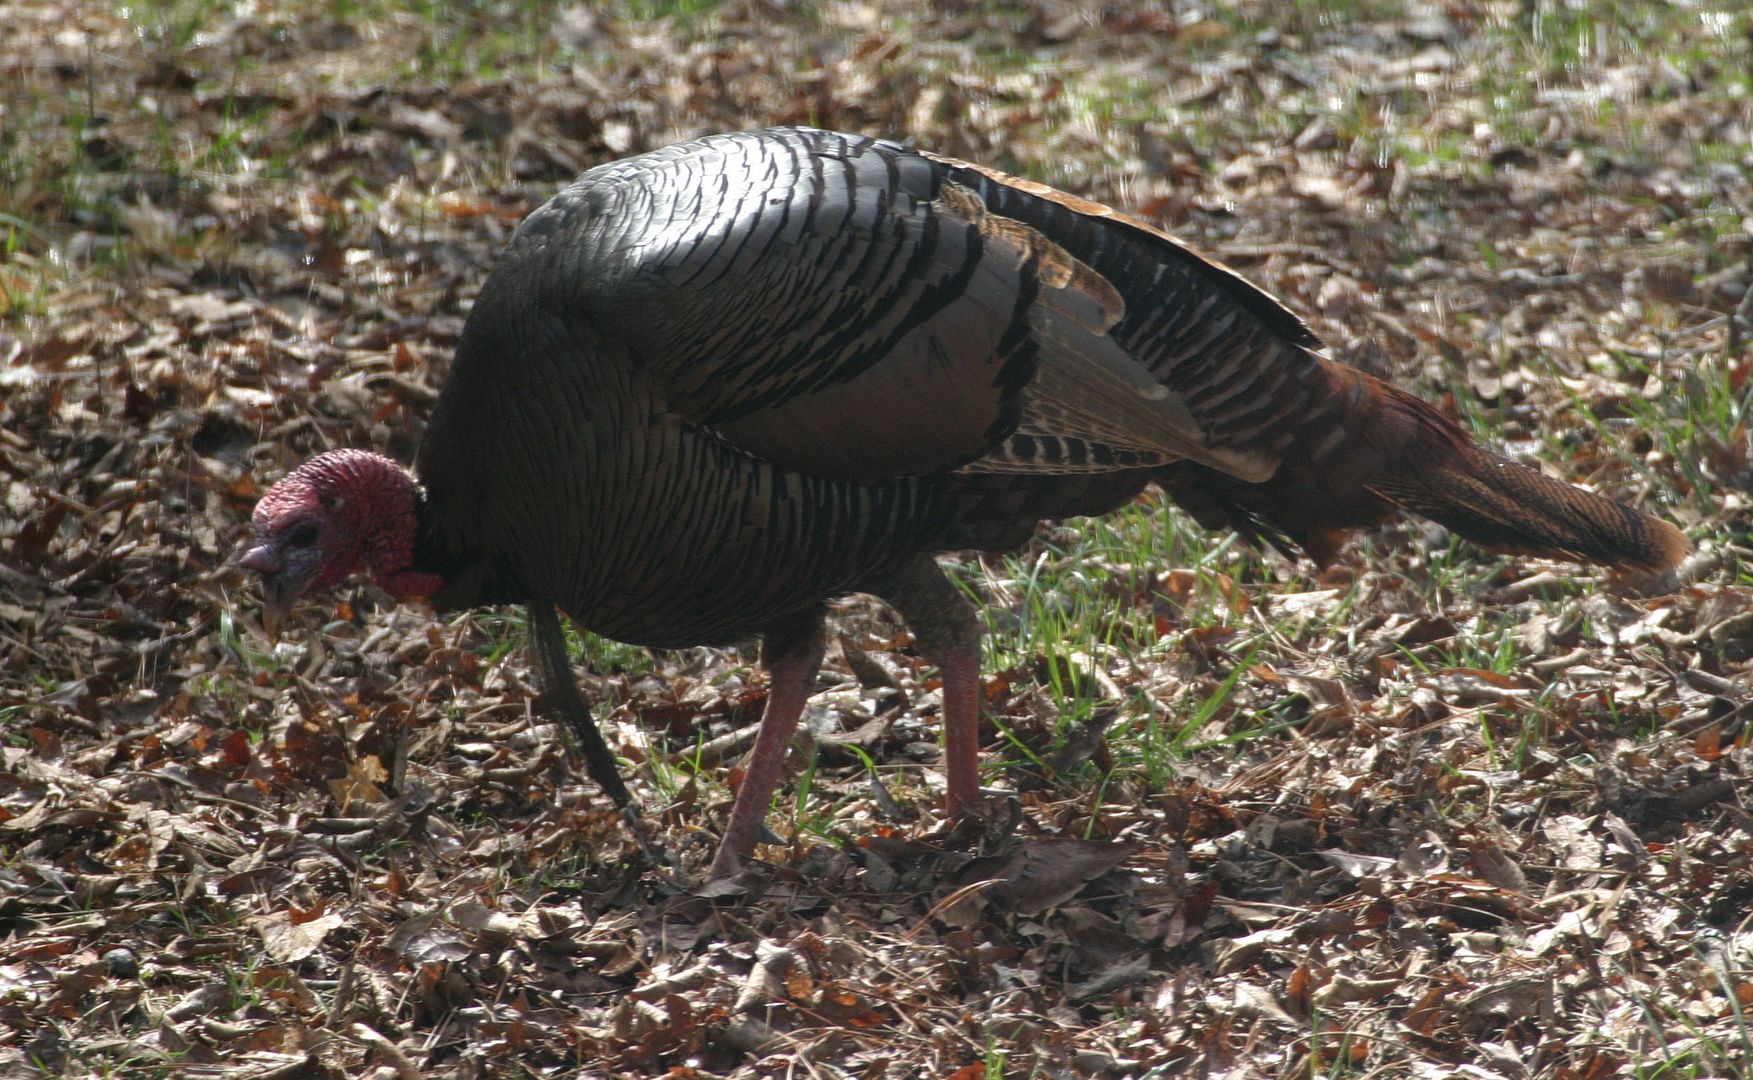 NC Spring Turkey Season Coming Soon Out Scouting with the long lens today